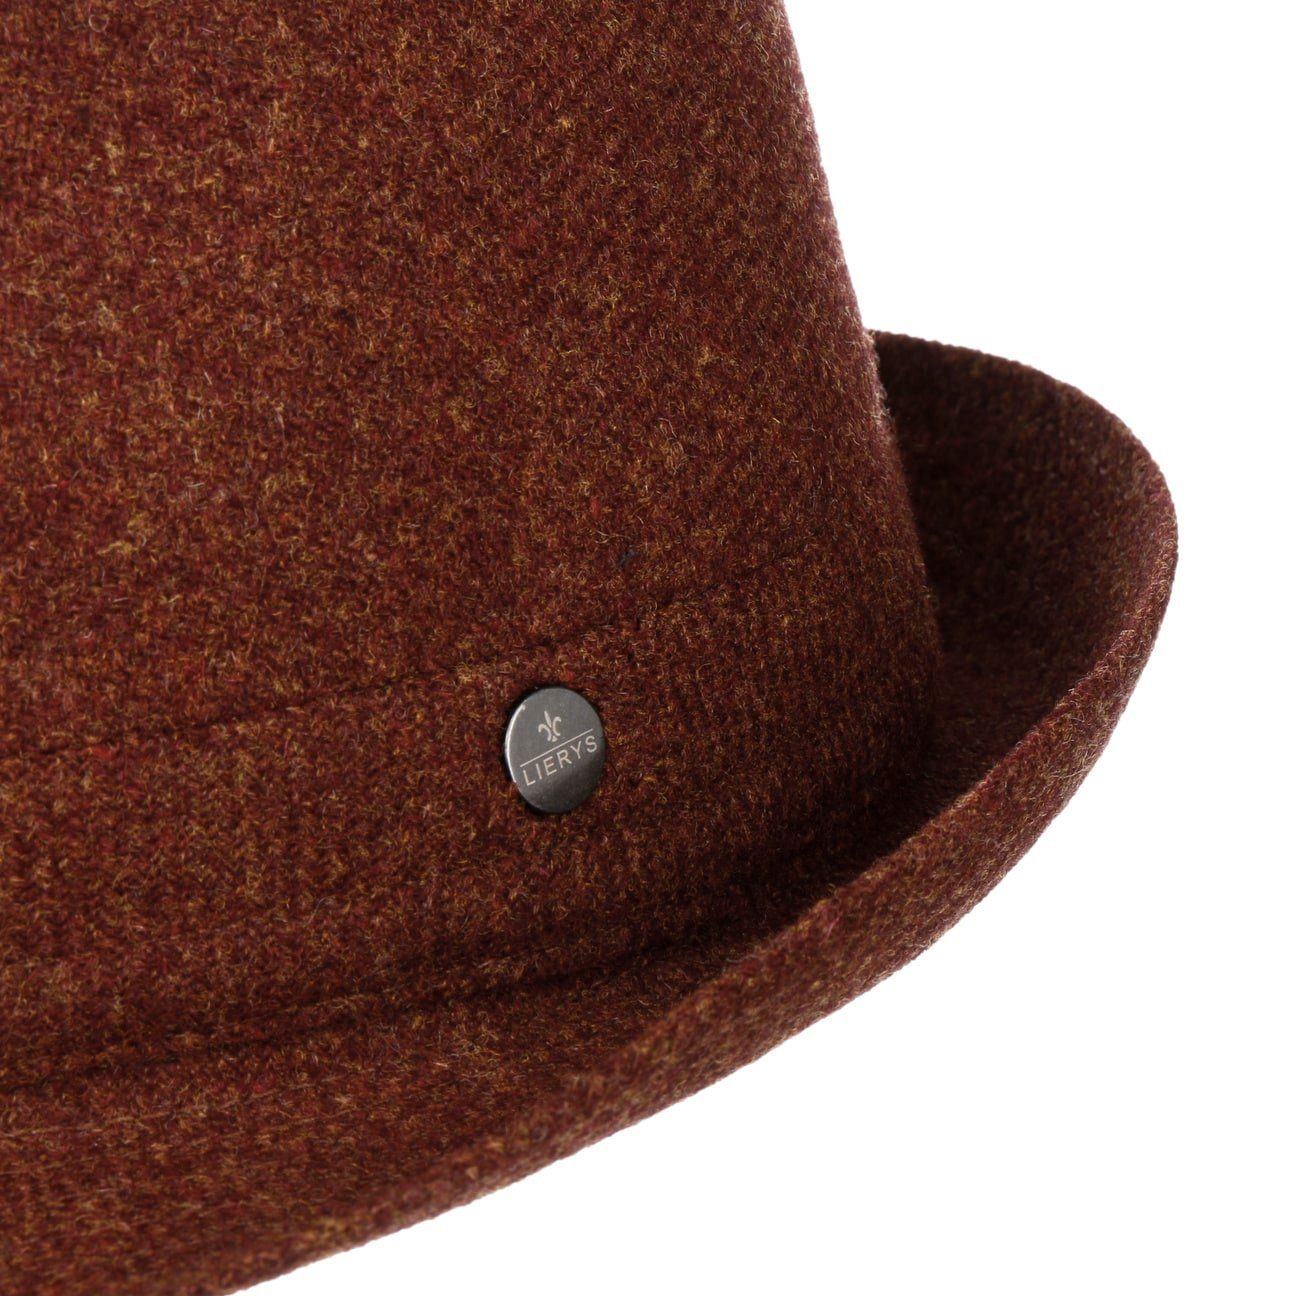 Made (1-St) in Lierys Trilby Wolltrilby Futter, mit Italy rost